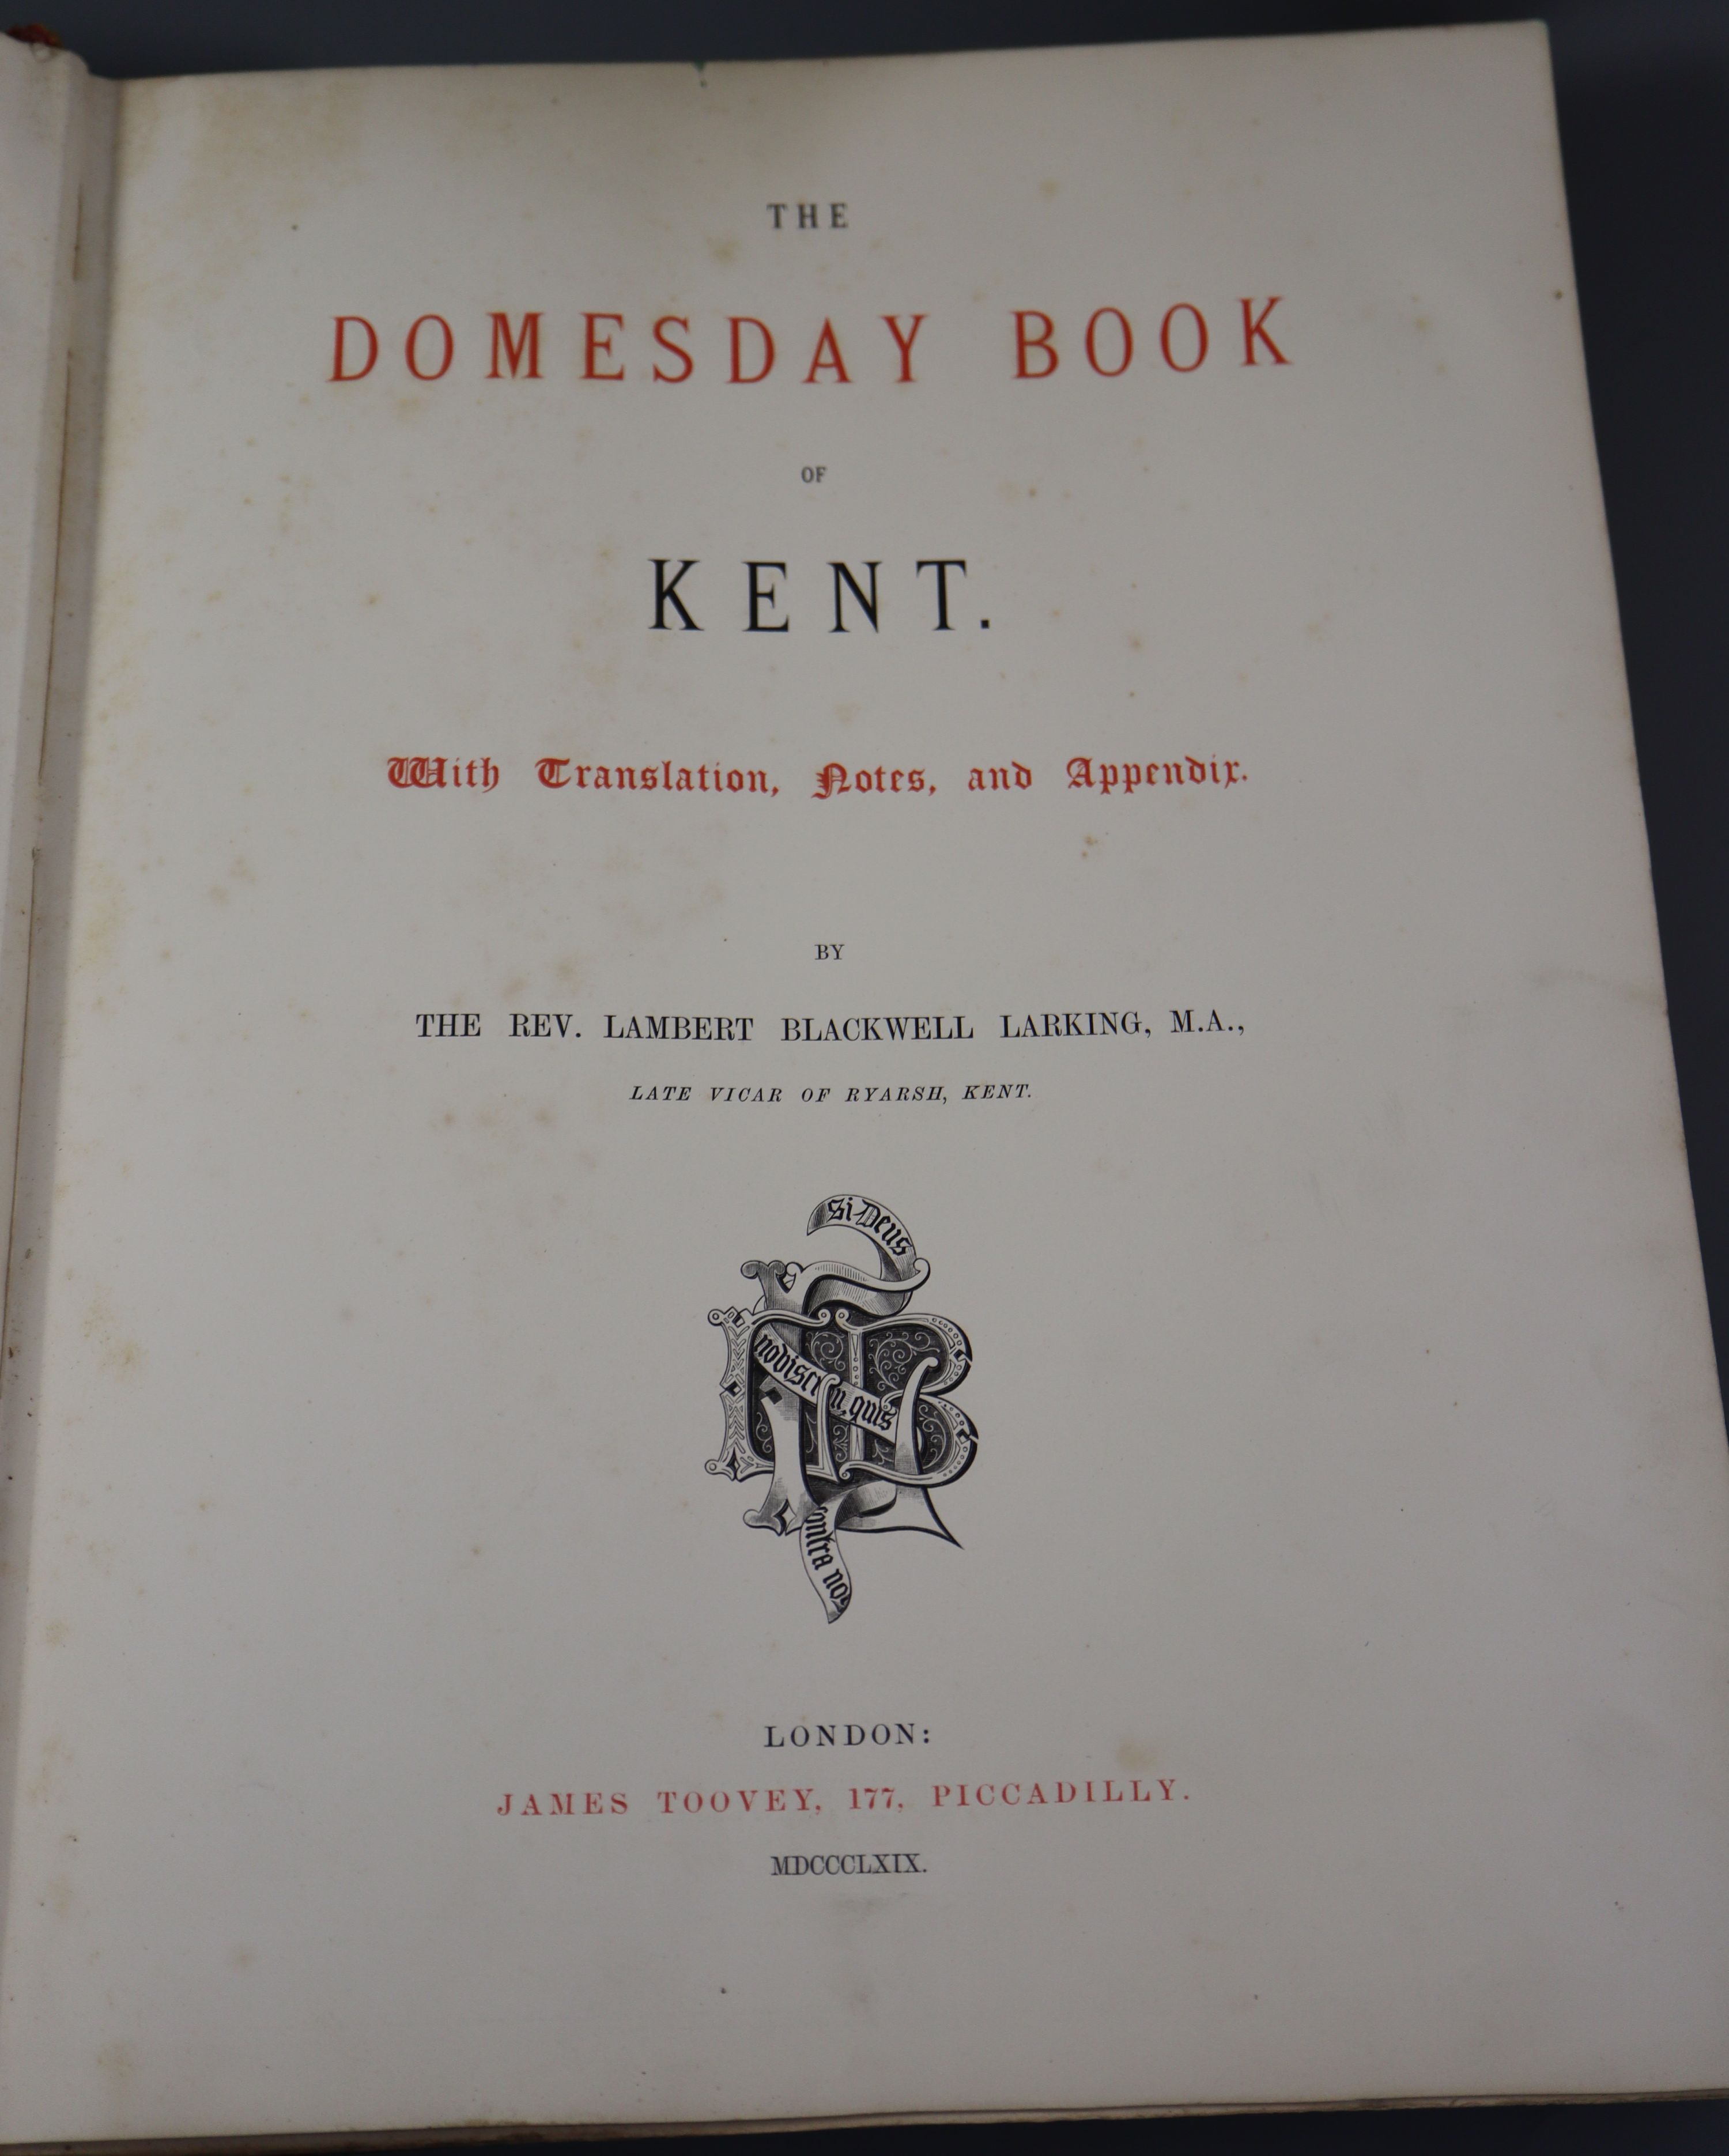 Berry, William - Pedigrees of the Families in the County of Kent, London 1830; Larking, Lambert - Image 9 of 15